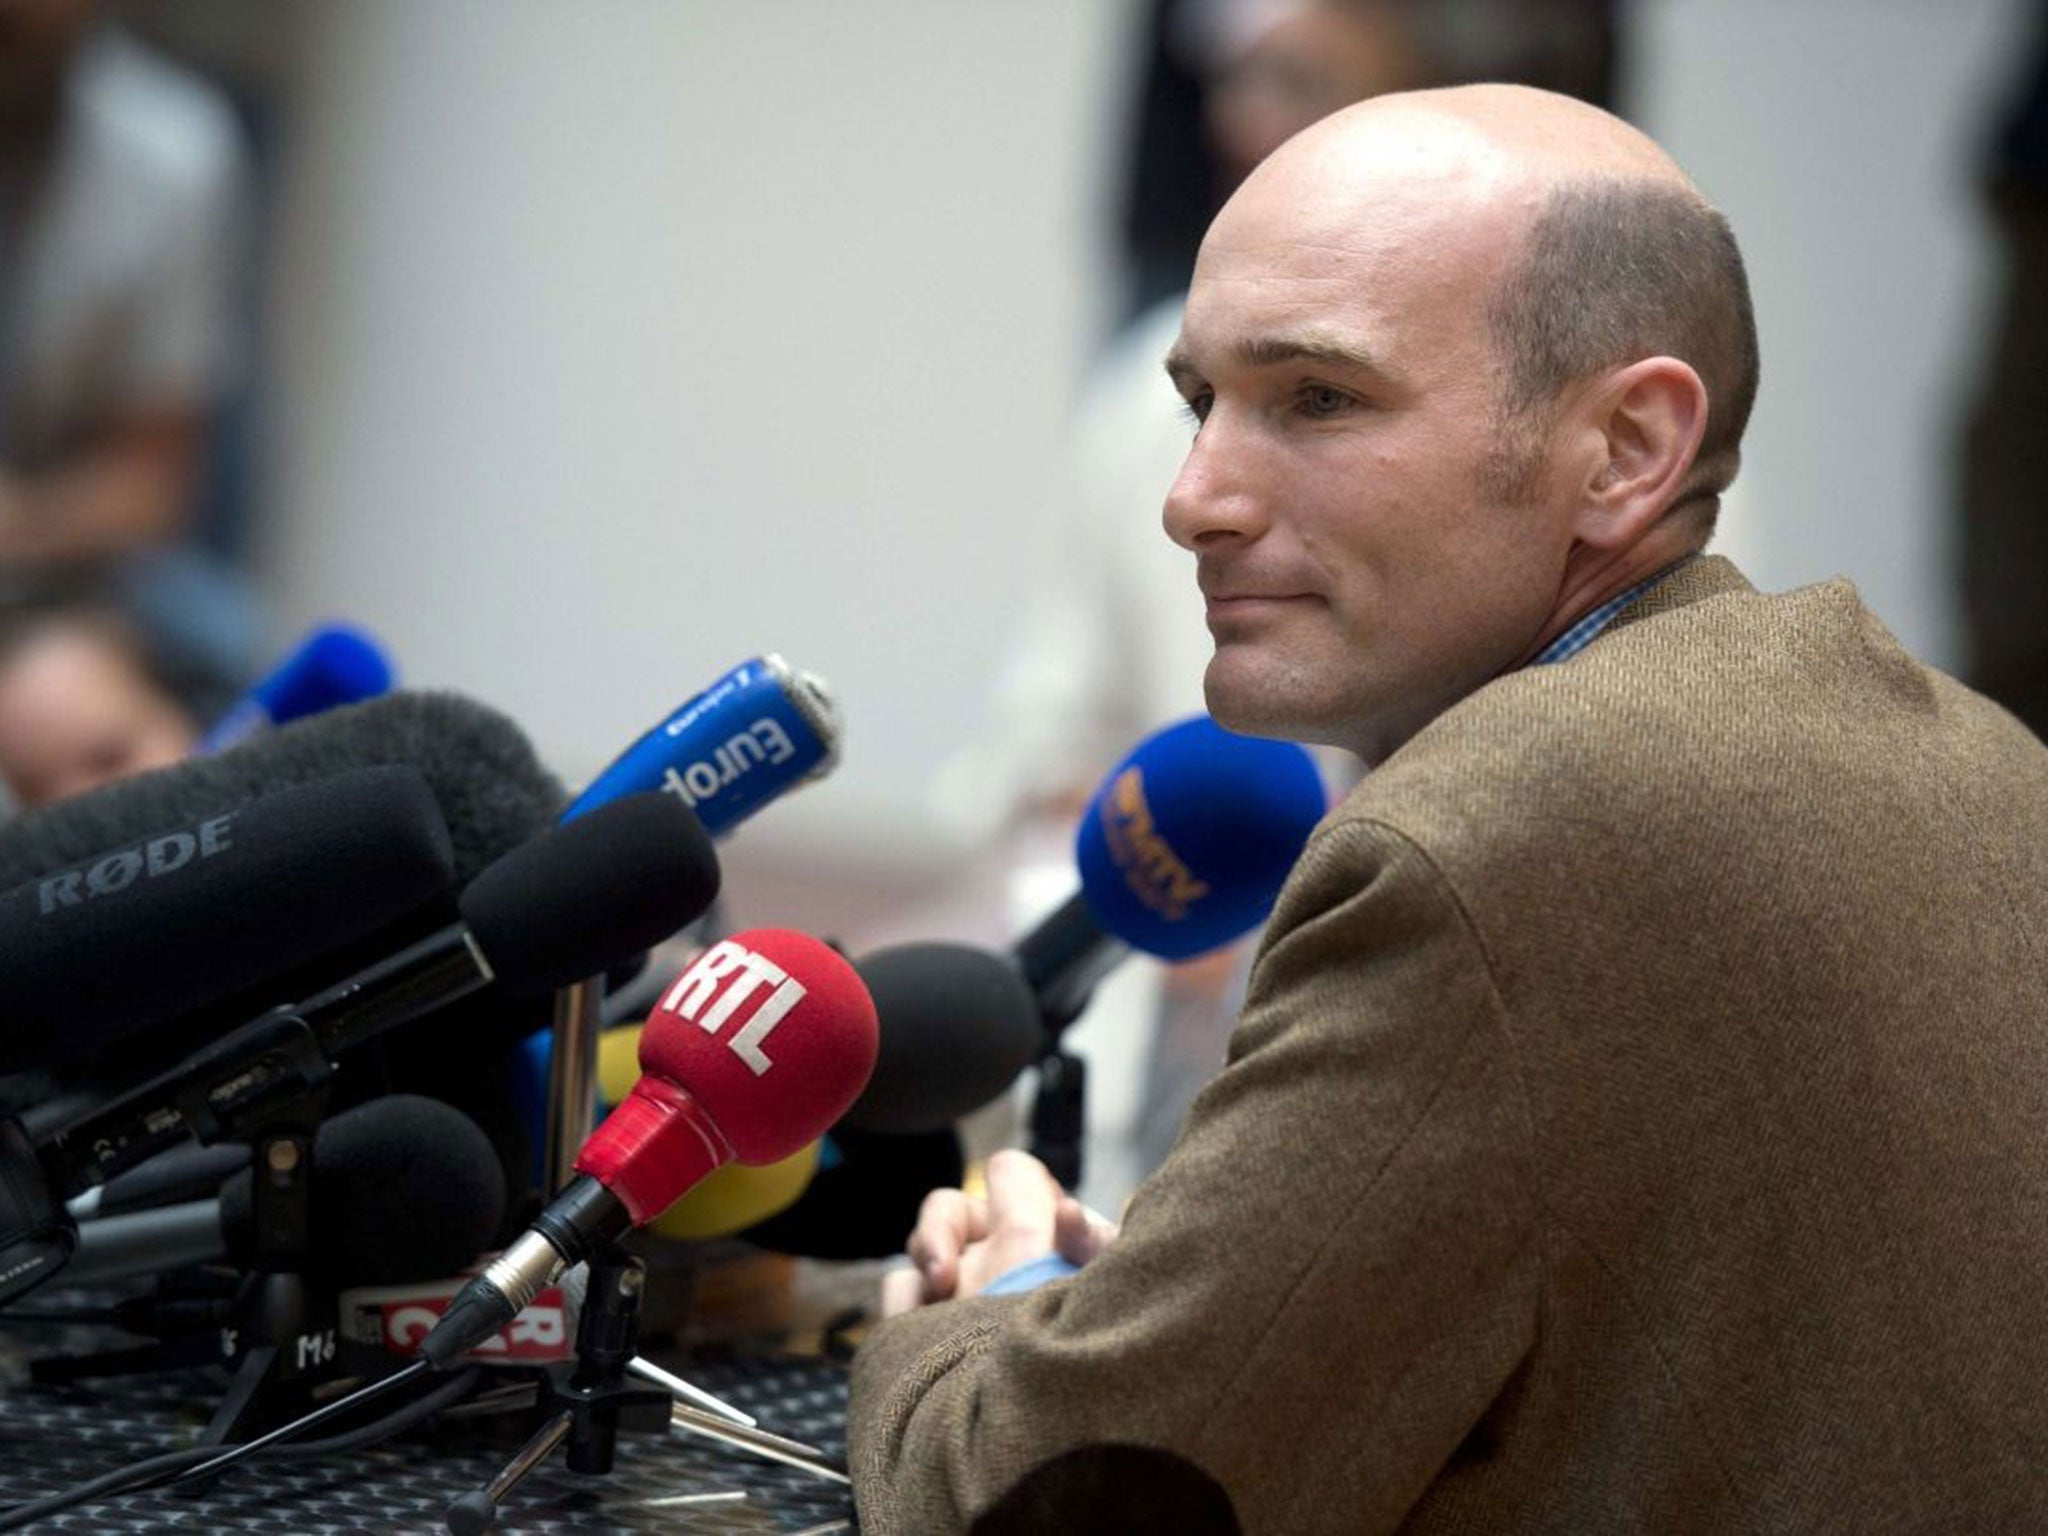 Nicolas Henin arranged the news conference today after the information came out in French newspapers